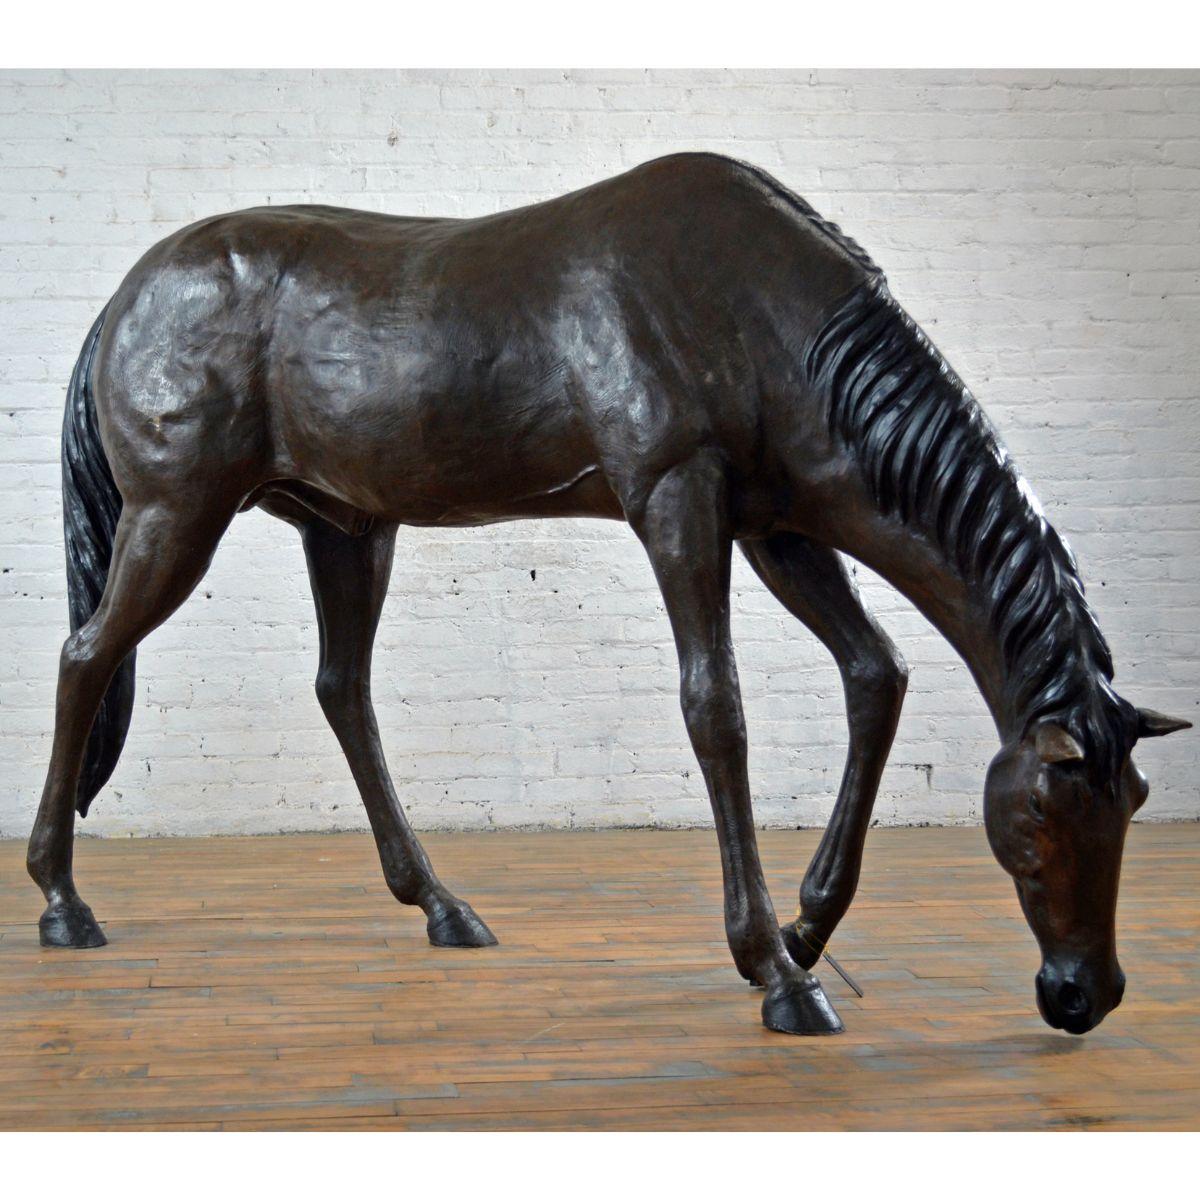 Our lost-wax bronze American Quarter Horse is a beautifully designed animal statue that will captivate everybody the moment they lay eyes on this realistic horse sculpture. Standing at a life-sized height with its head bowed down as though eating or